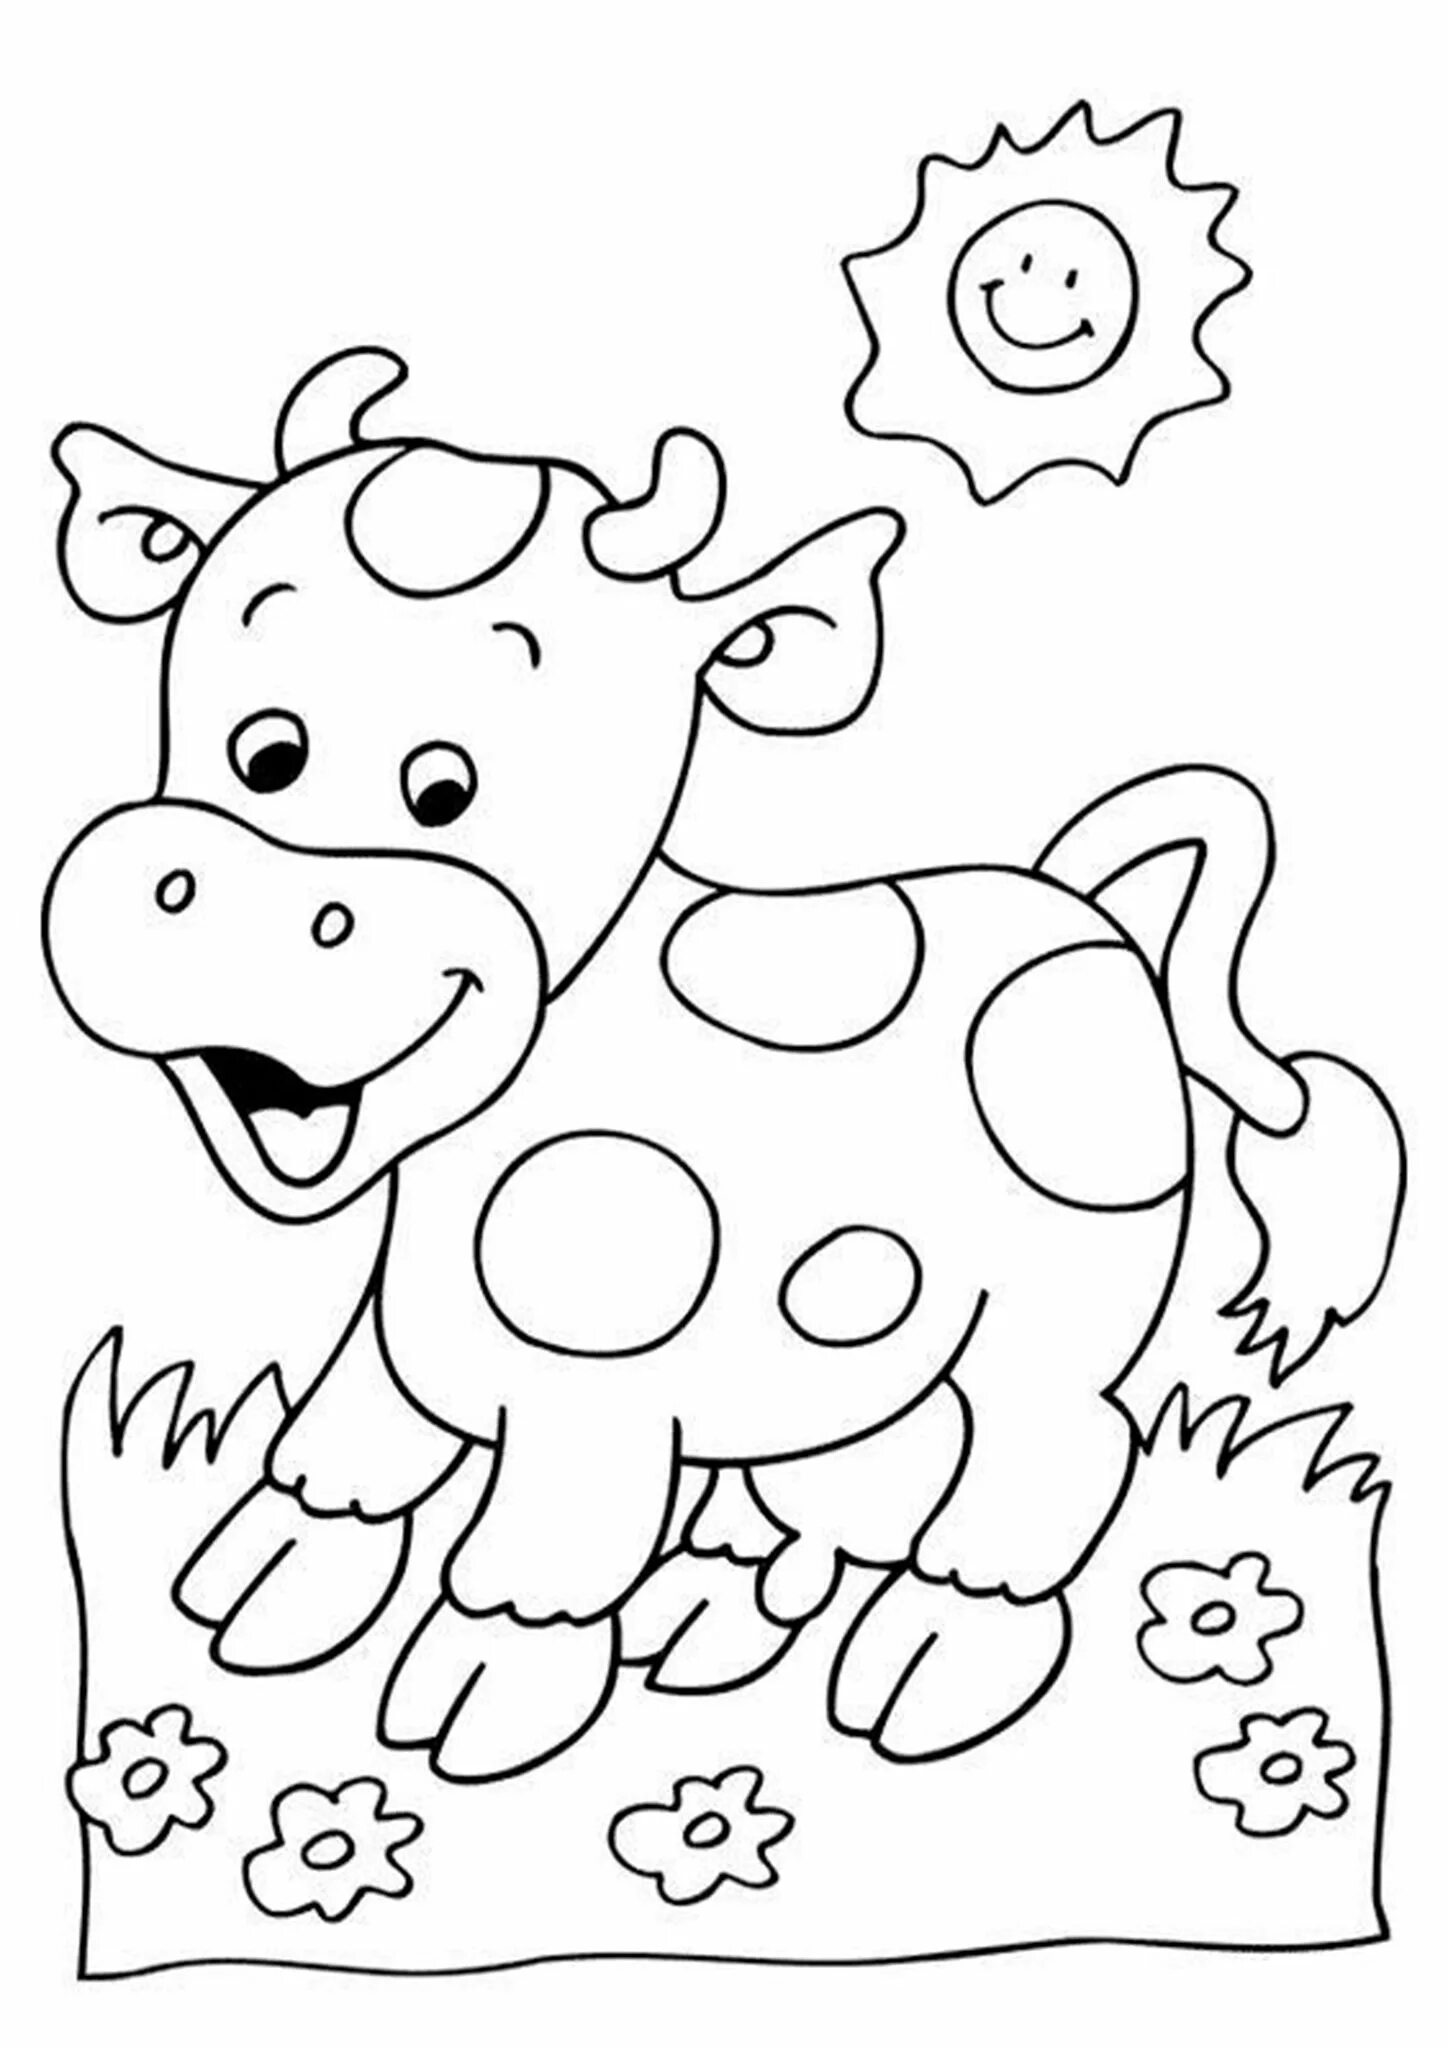 Amazing bull coloring for kids